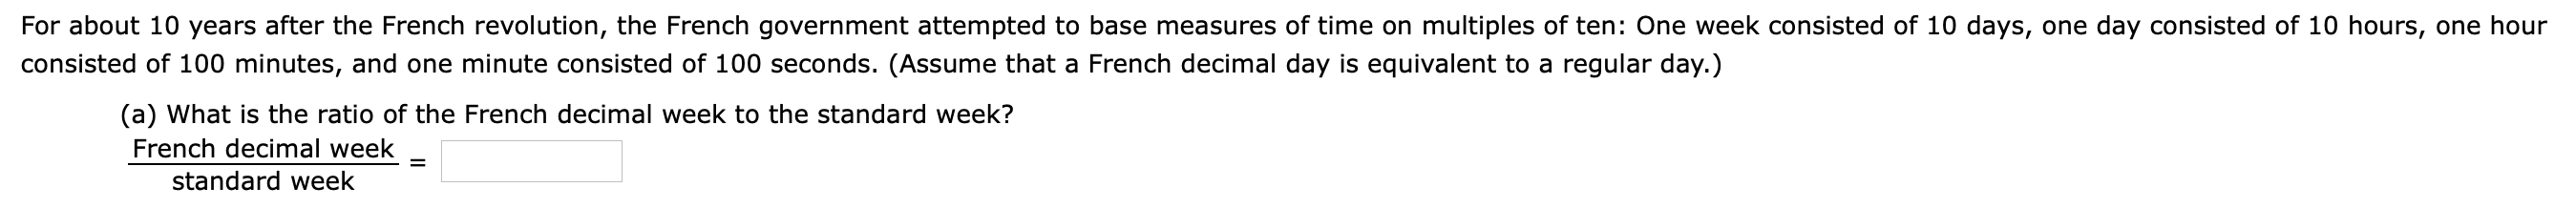 For about 10 years after the French revolution, the French government attempted to base measures of time on multiples of ten: One week consisted of 10 days, one day consisted of 10 hours, one hour
consisted of 100 minutes, and one minute consisted of 100 seconds. (Assume that a French decimal day is equivalent to a regular day.)
(a) What is the ratio of the French decimal week to the standard week?
French decimal week
%|
standard week
